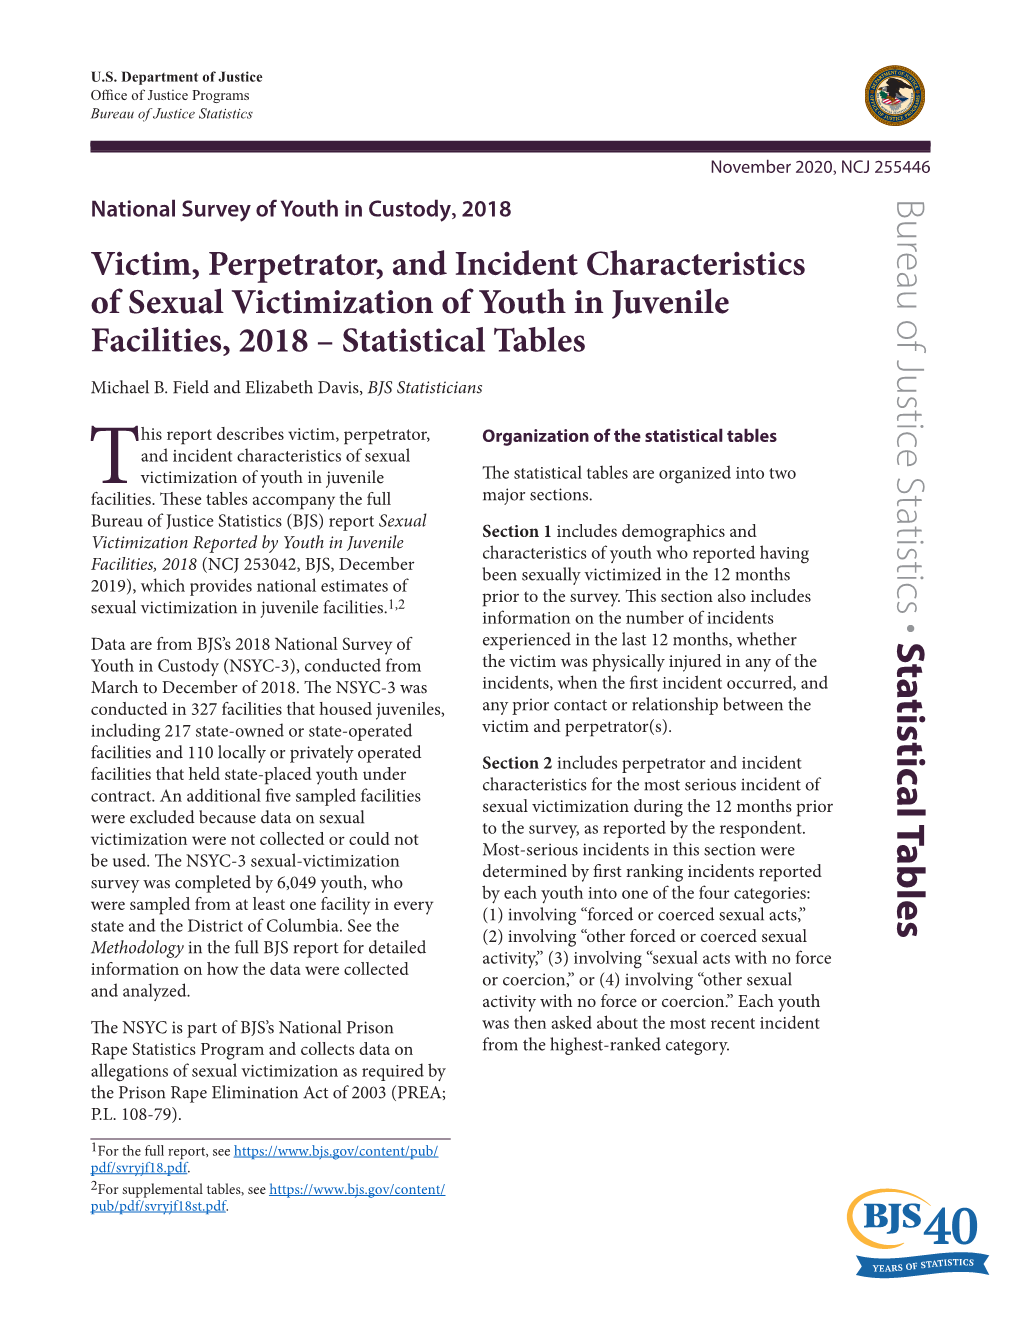 Victim, Perpetrator, and Incident Characteristics of Sexual Victimization of Youth in Juvenile Facilities, 2018 – Statistical Tables Michael B